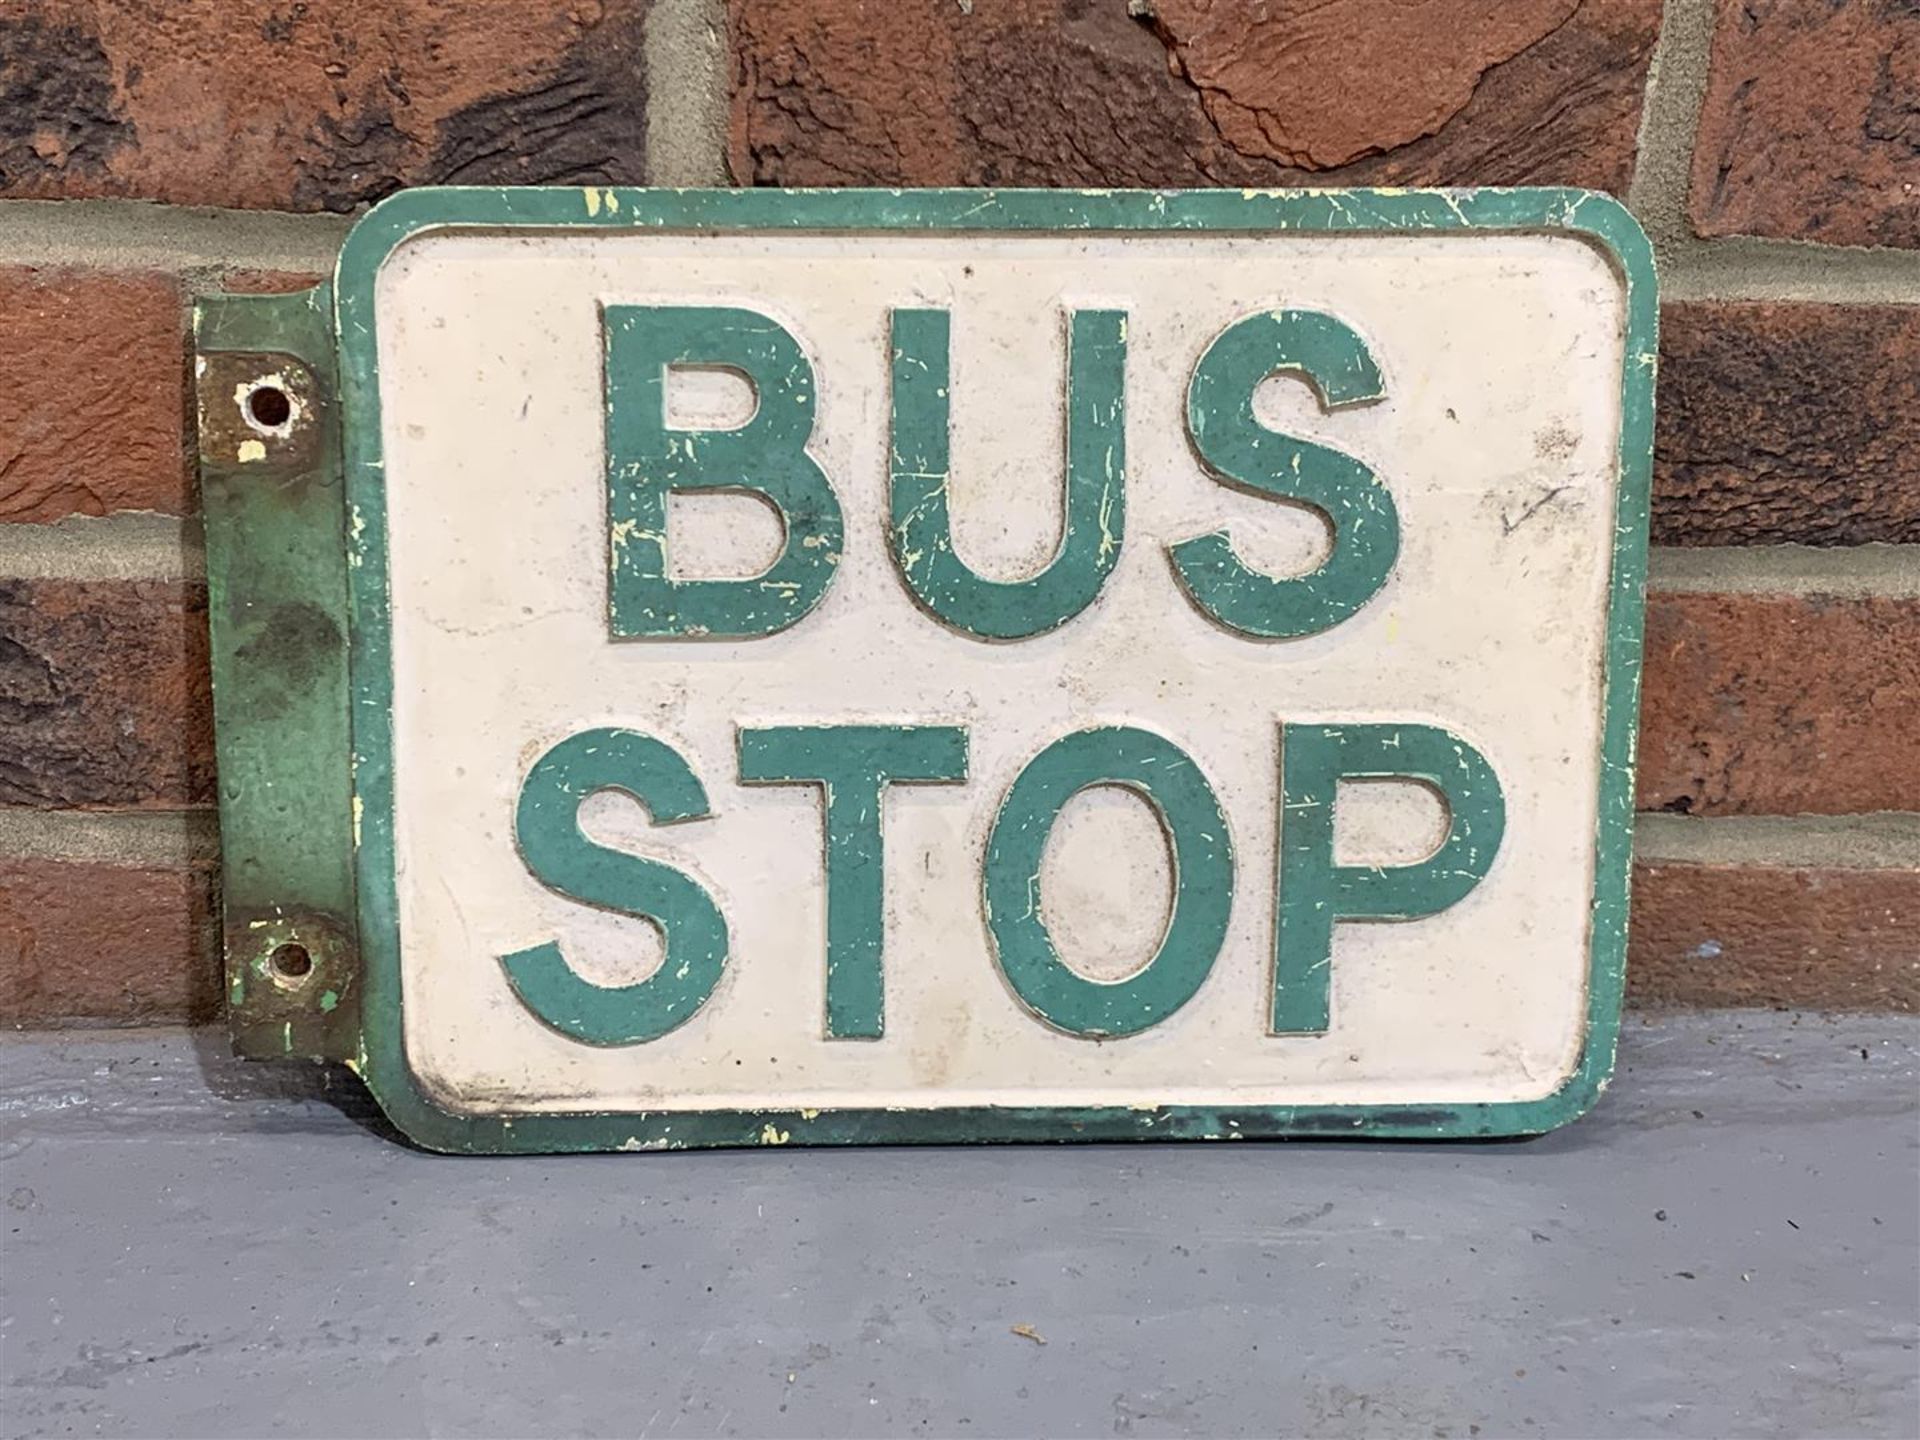 Cast Aluminium Double Sided Bus Stop Sign - Image 2 of 2